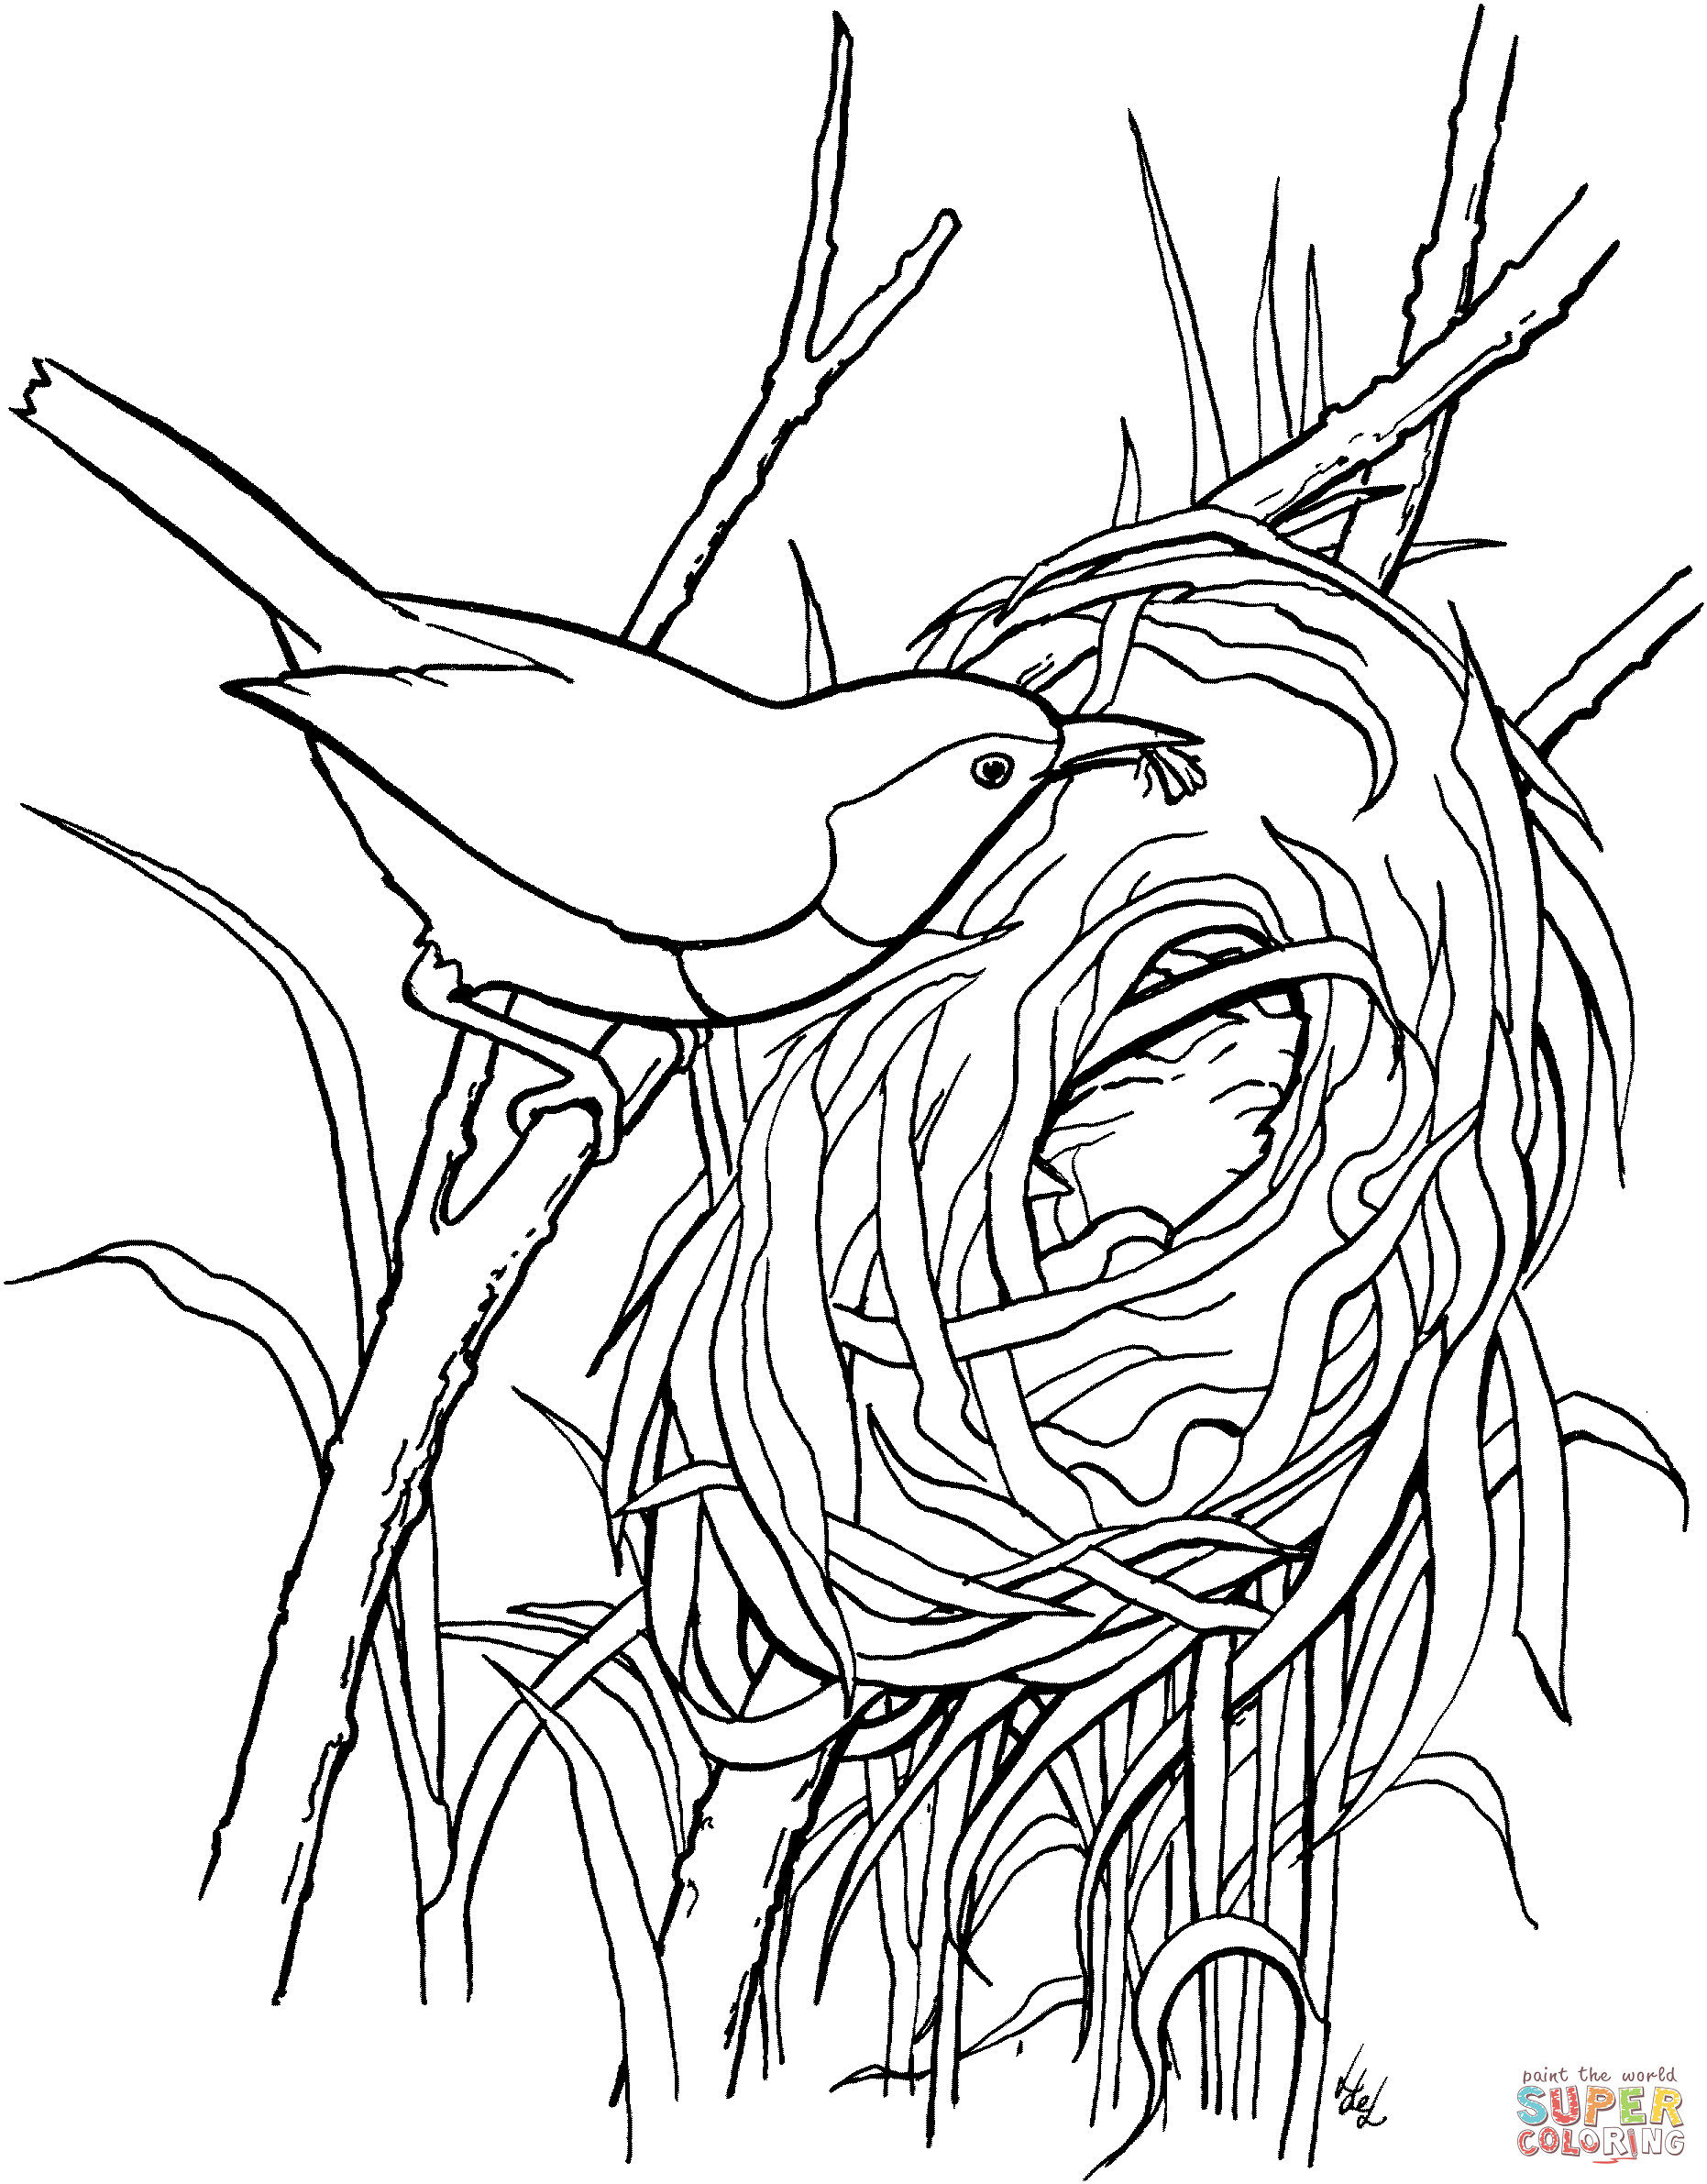 Nest Coloring Pages
 Nest White coloring Download Nest White coloring